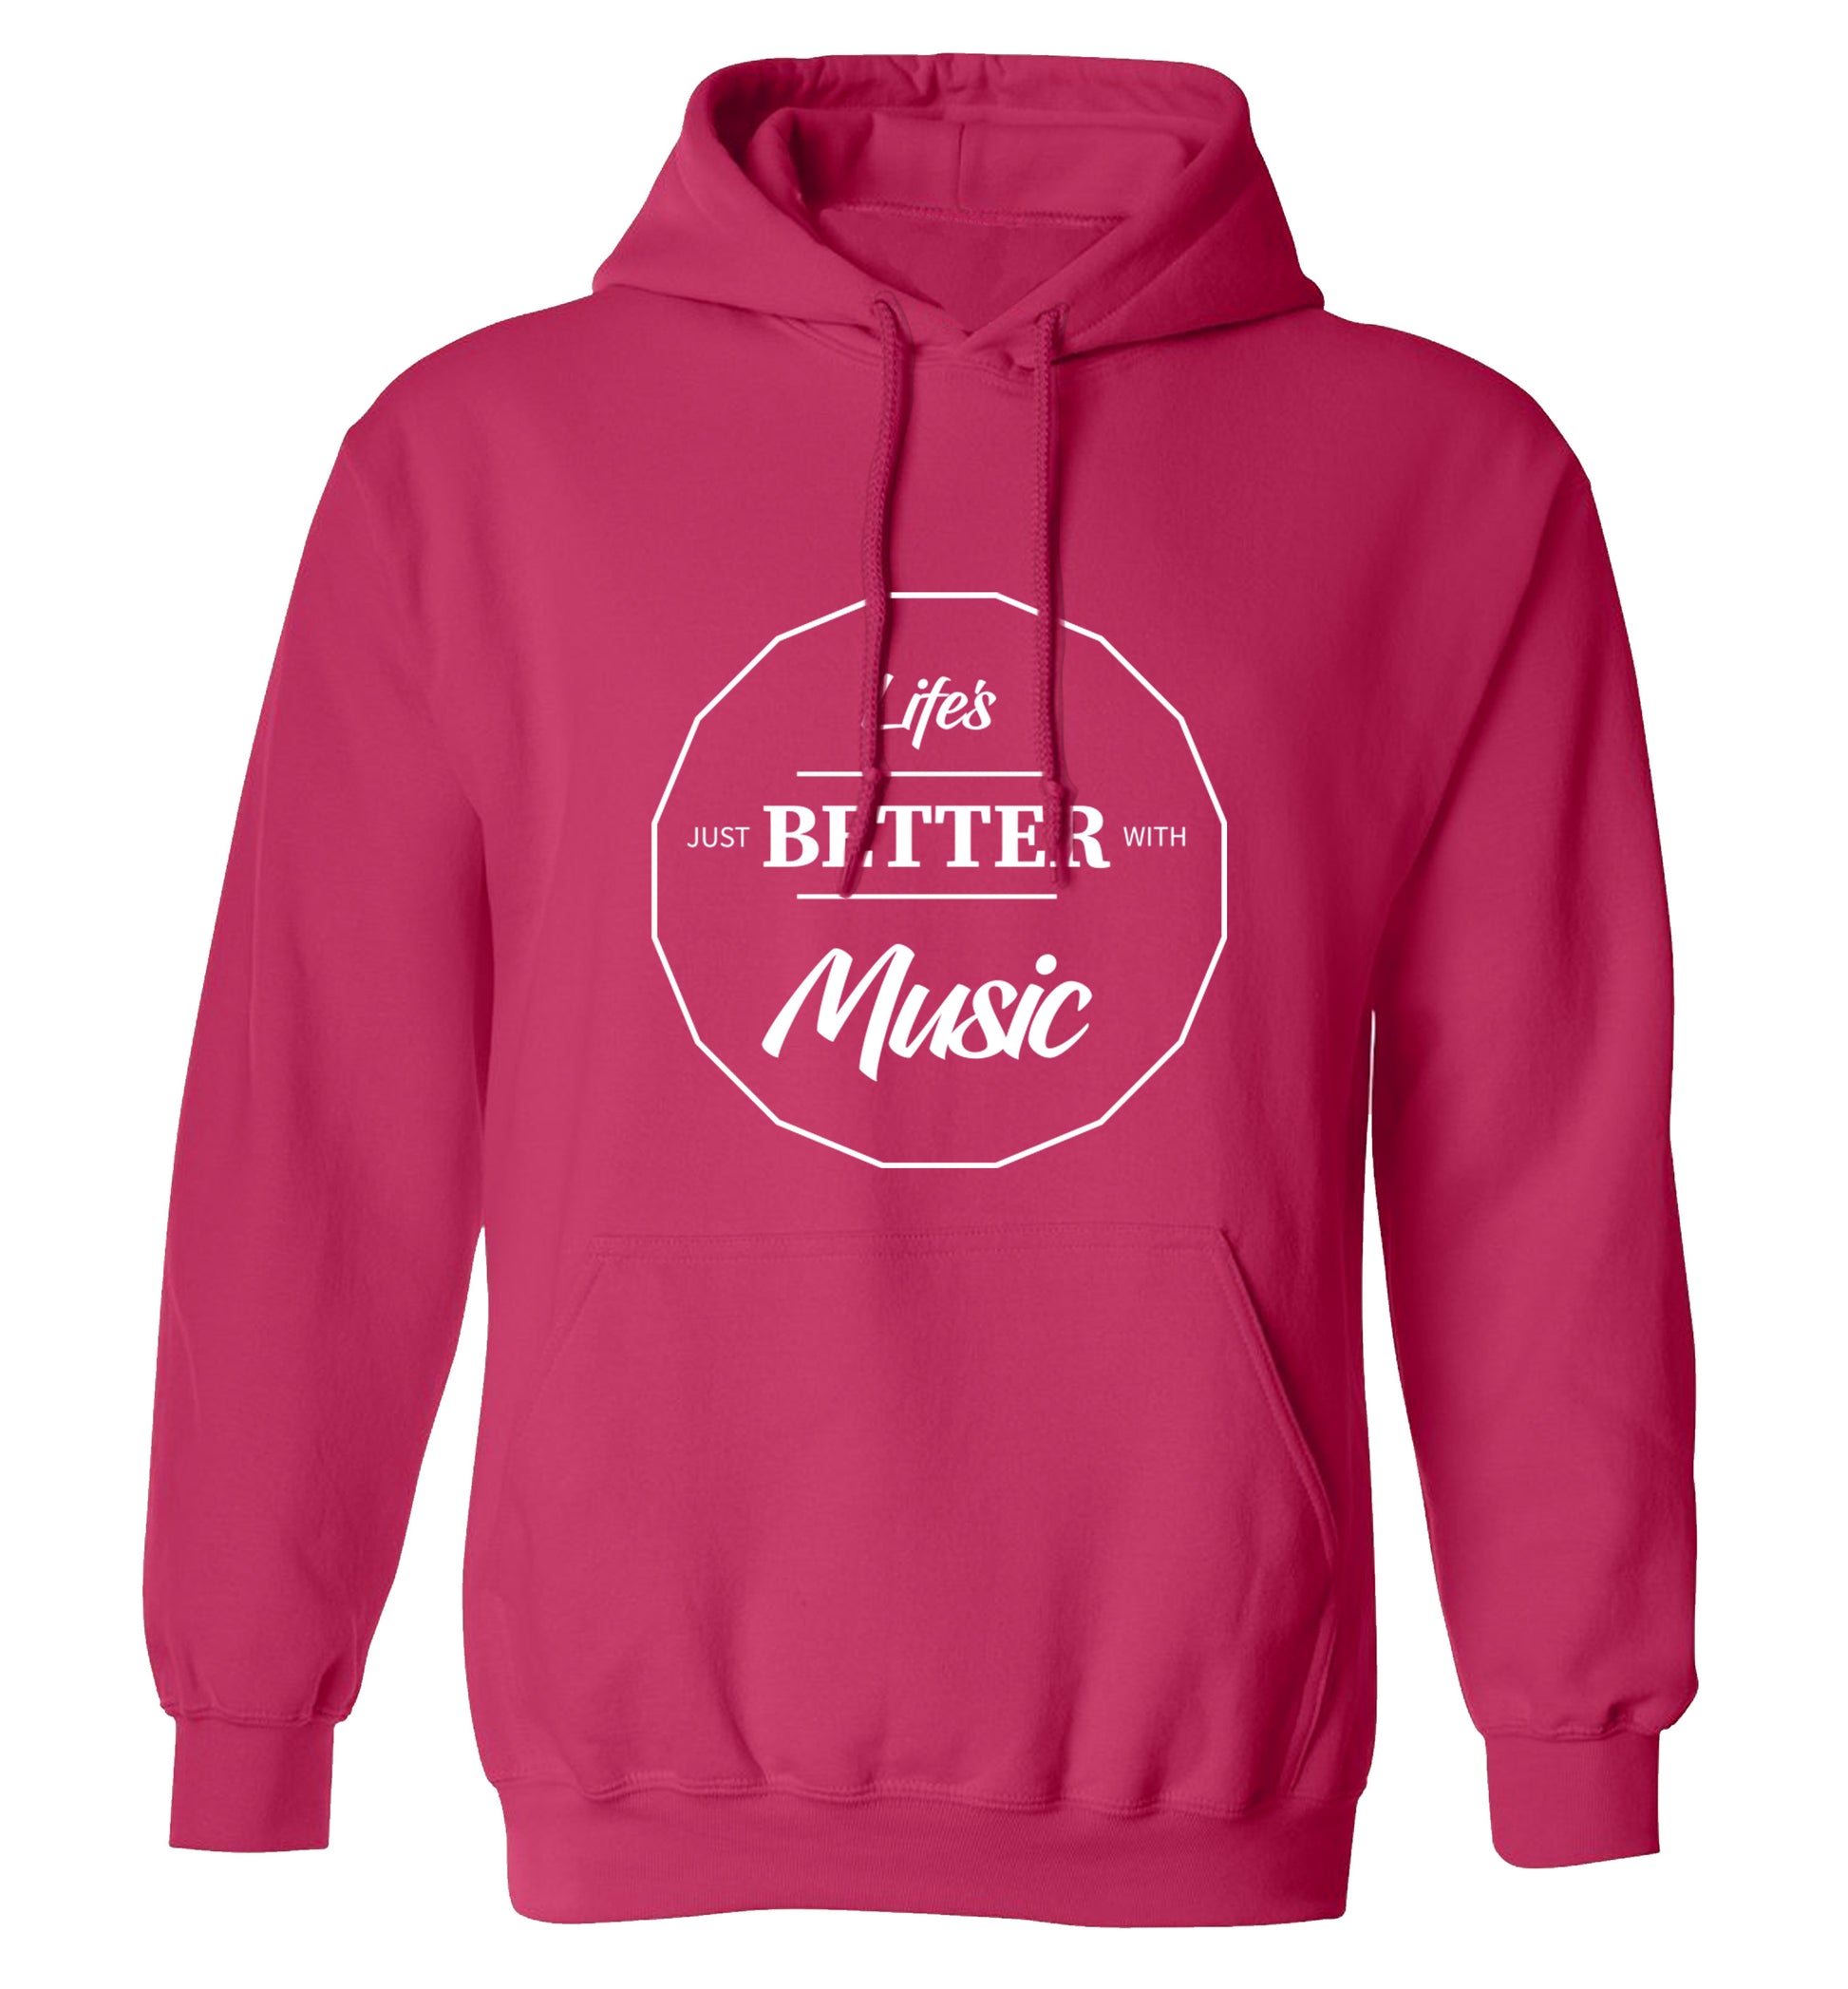 Life is Better With Music adults unisex pink hoodie 2XL